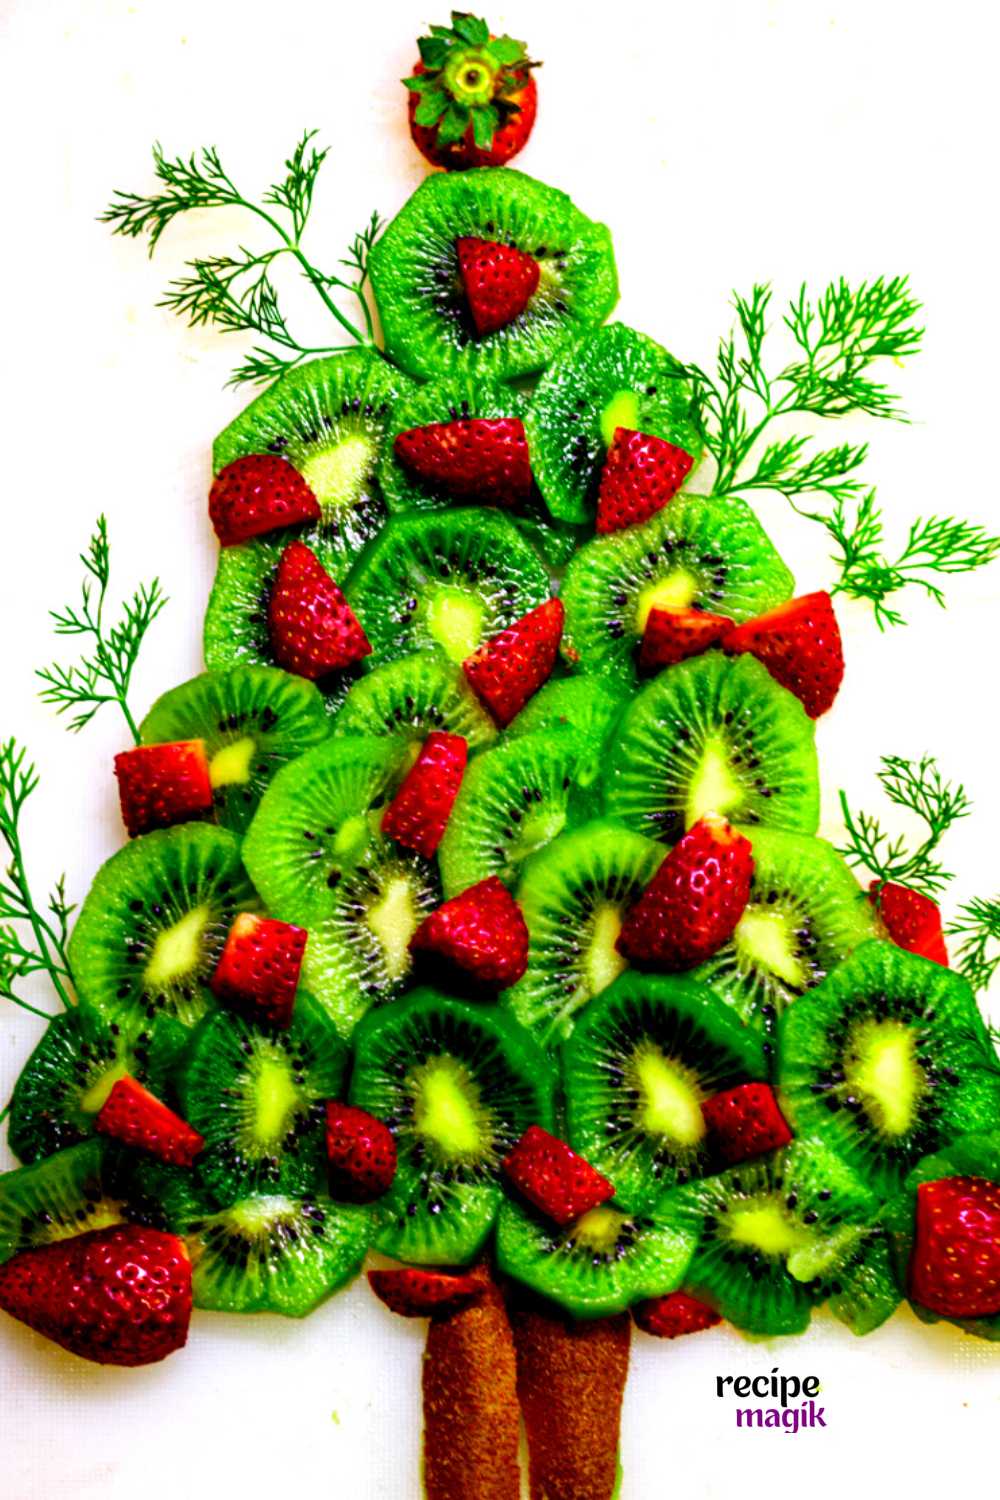 Christmas tree fruit platter with fresh fruits and dill leaves arranged on a white board